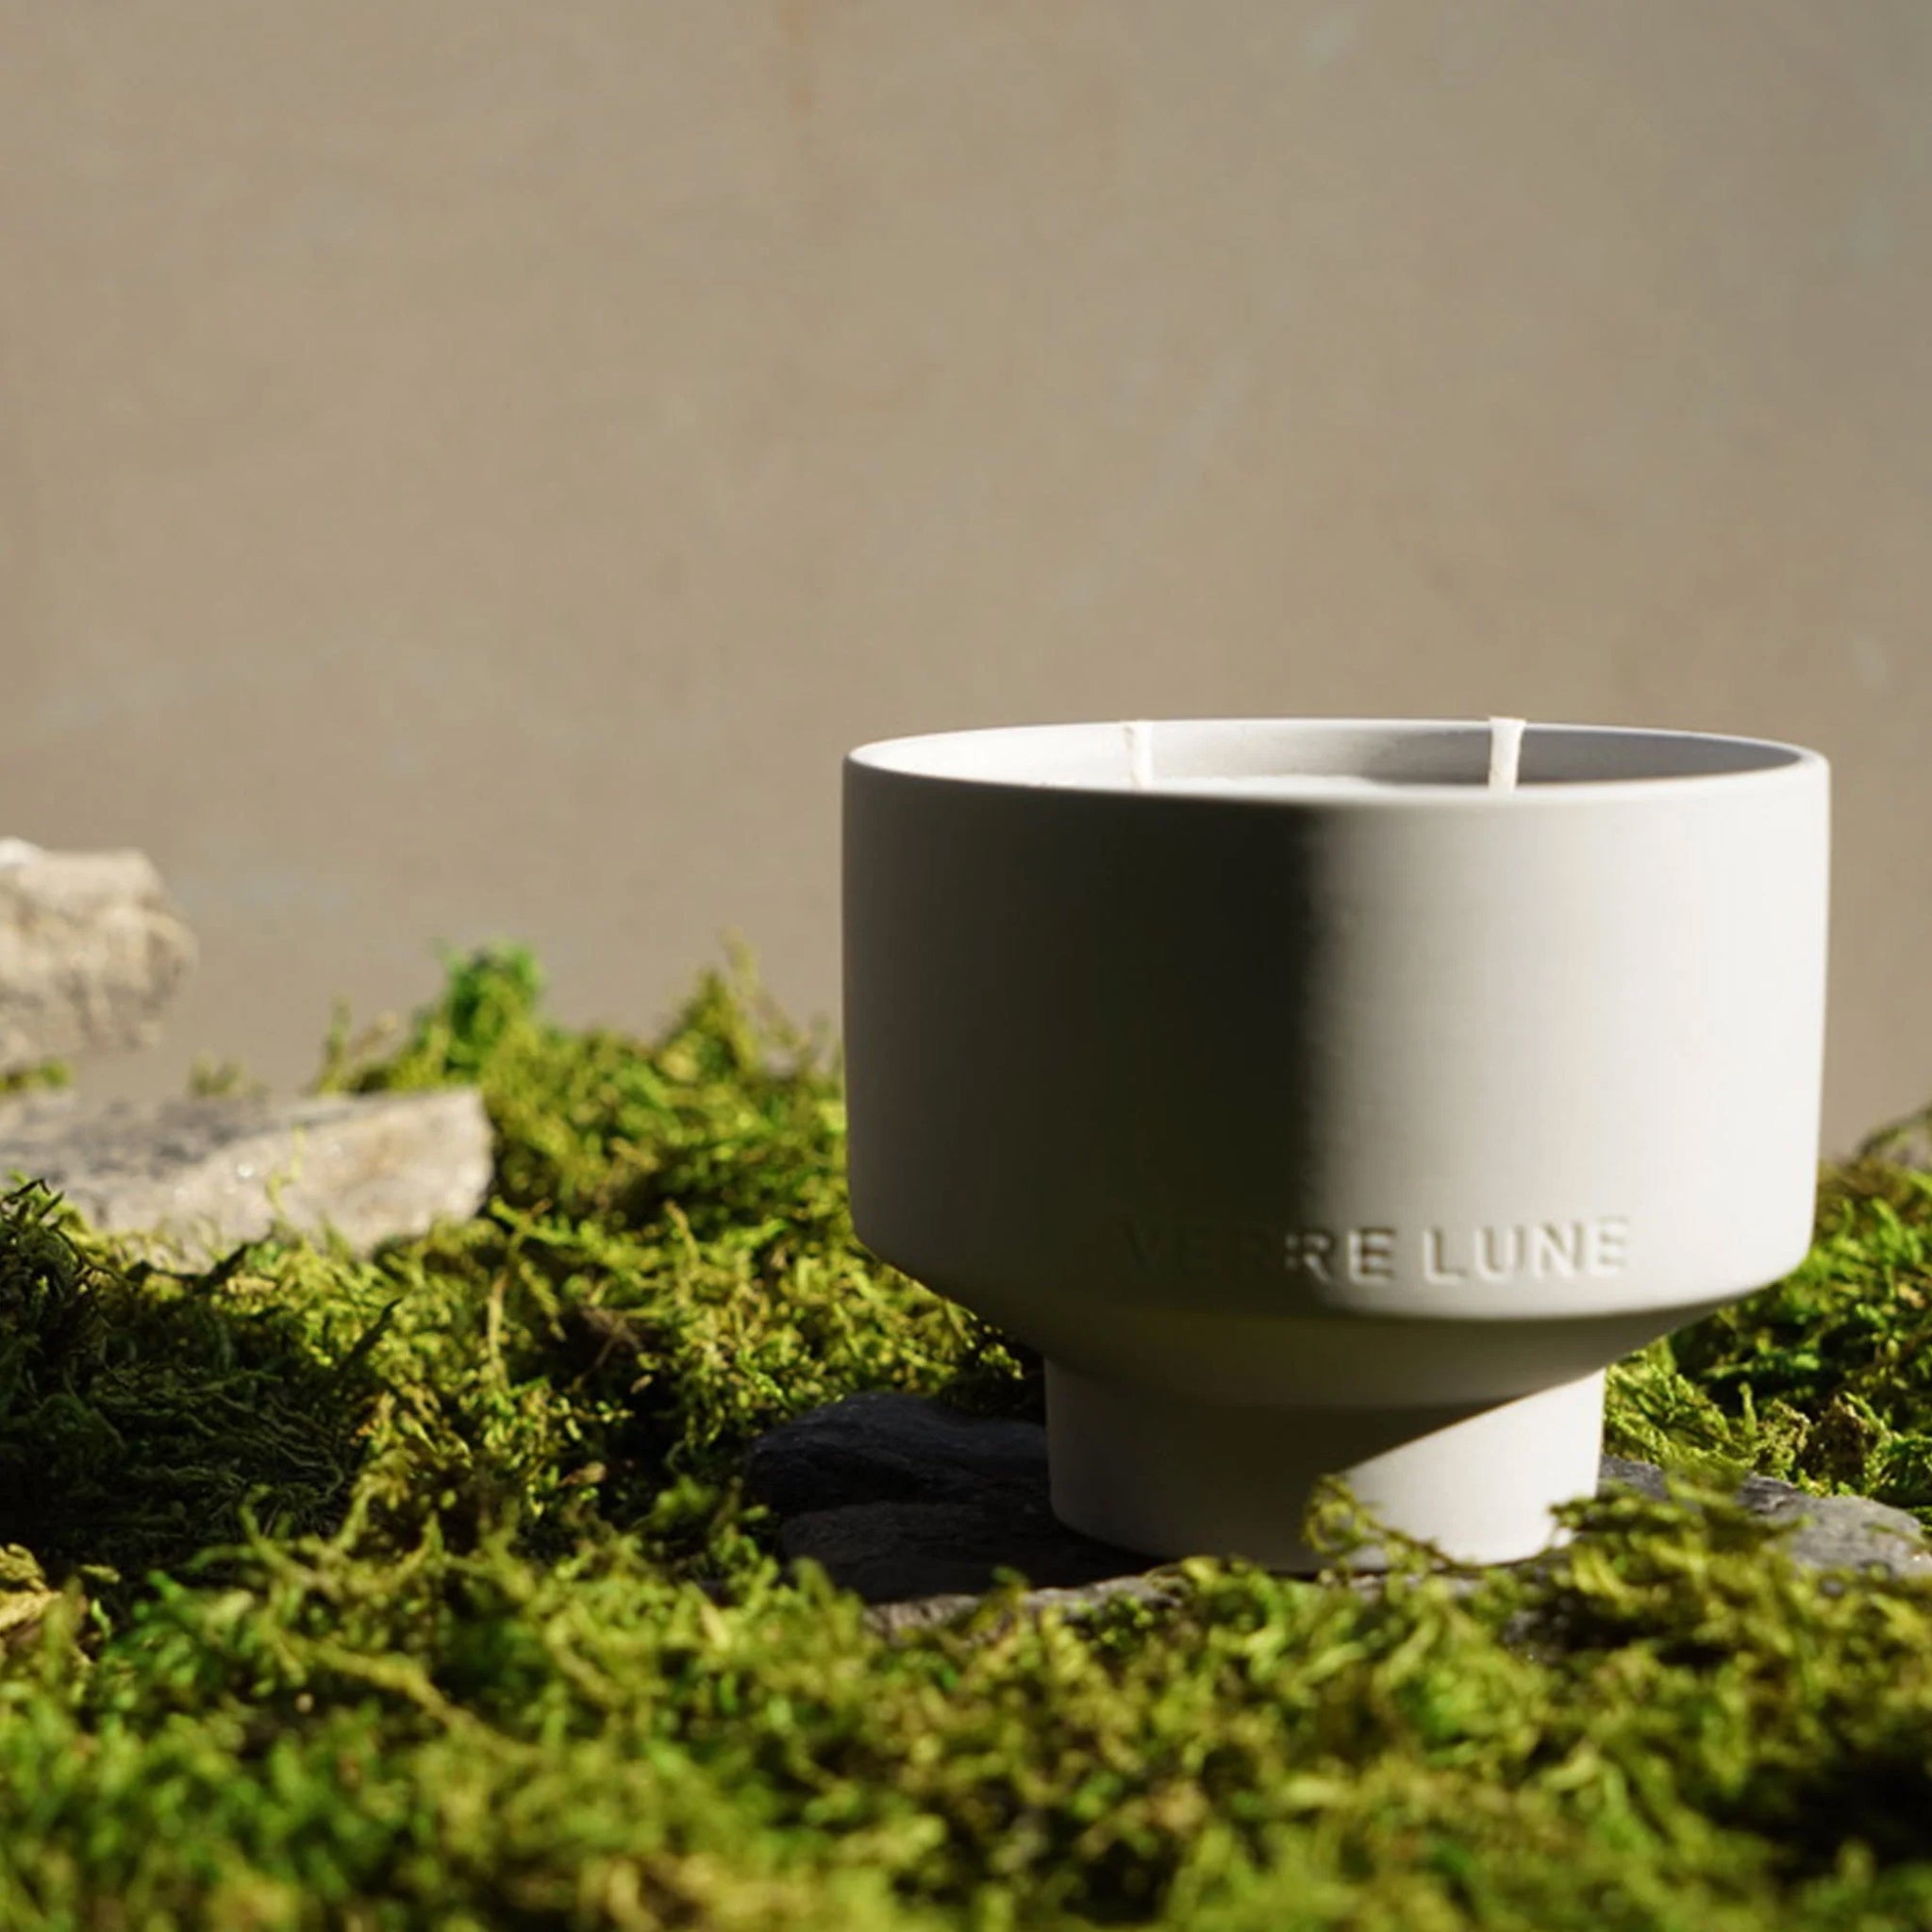 Verre Lune stone candle in the middle of a scene in nature with moss and rocks.